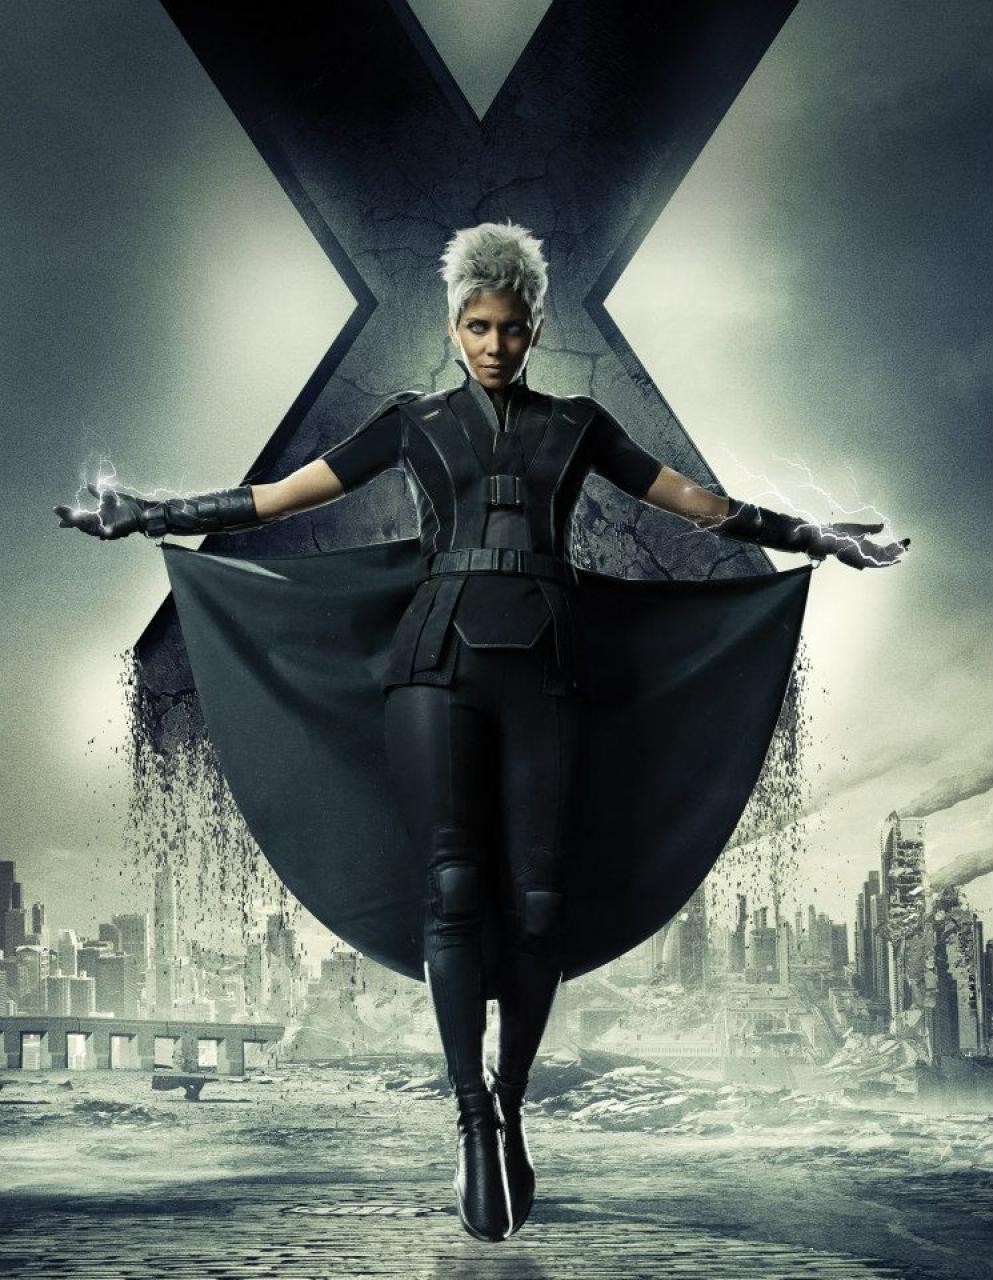 Halle Berry stars as Ororo Munroe/Storm in 20th Century Fox's X-Men: Days of Future Past (2014)